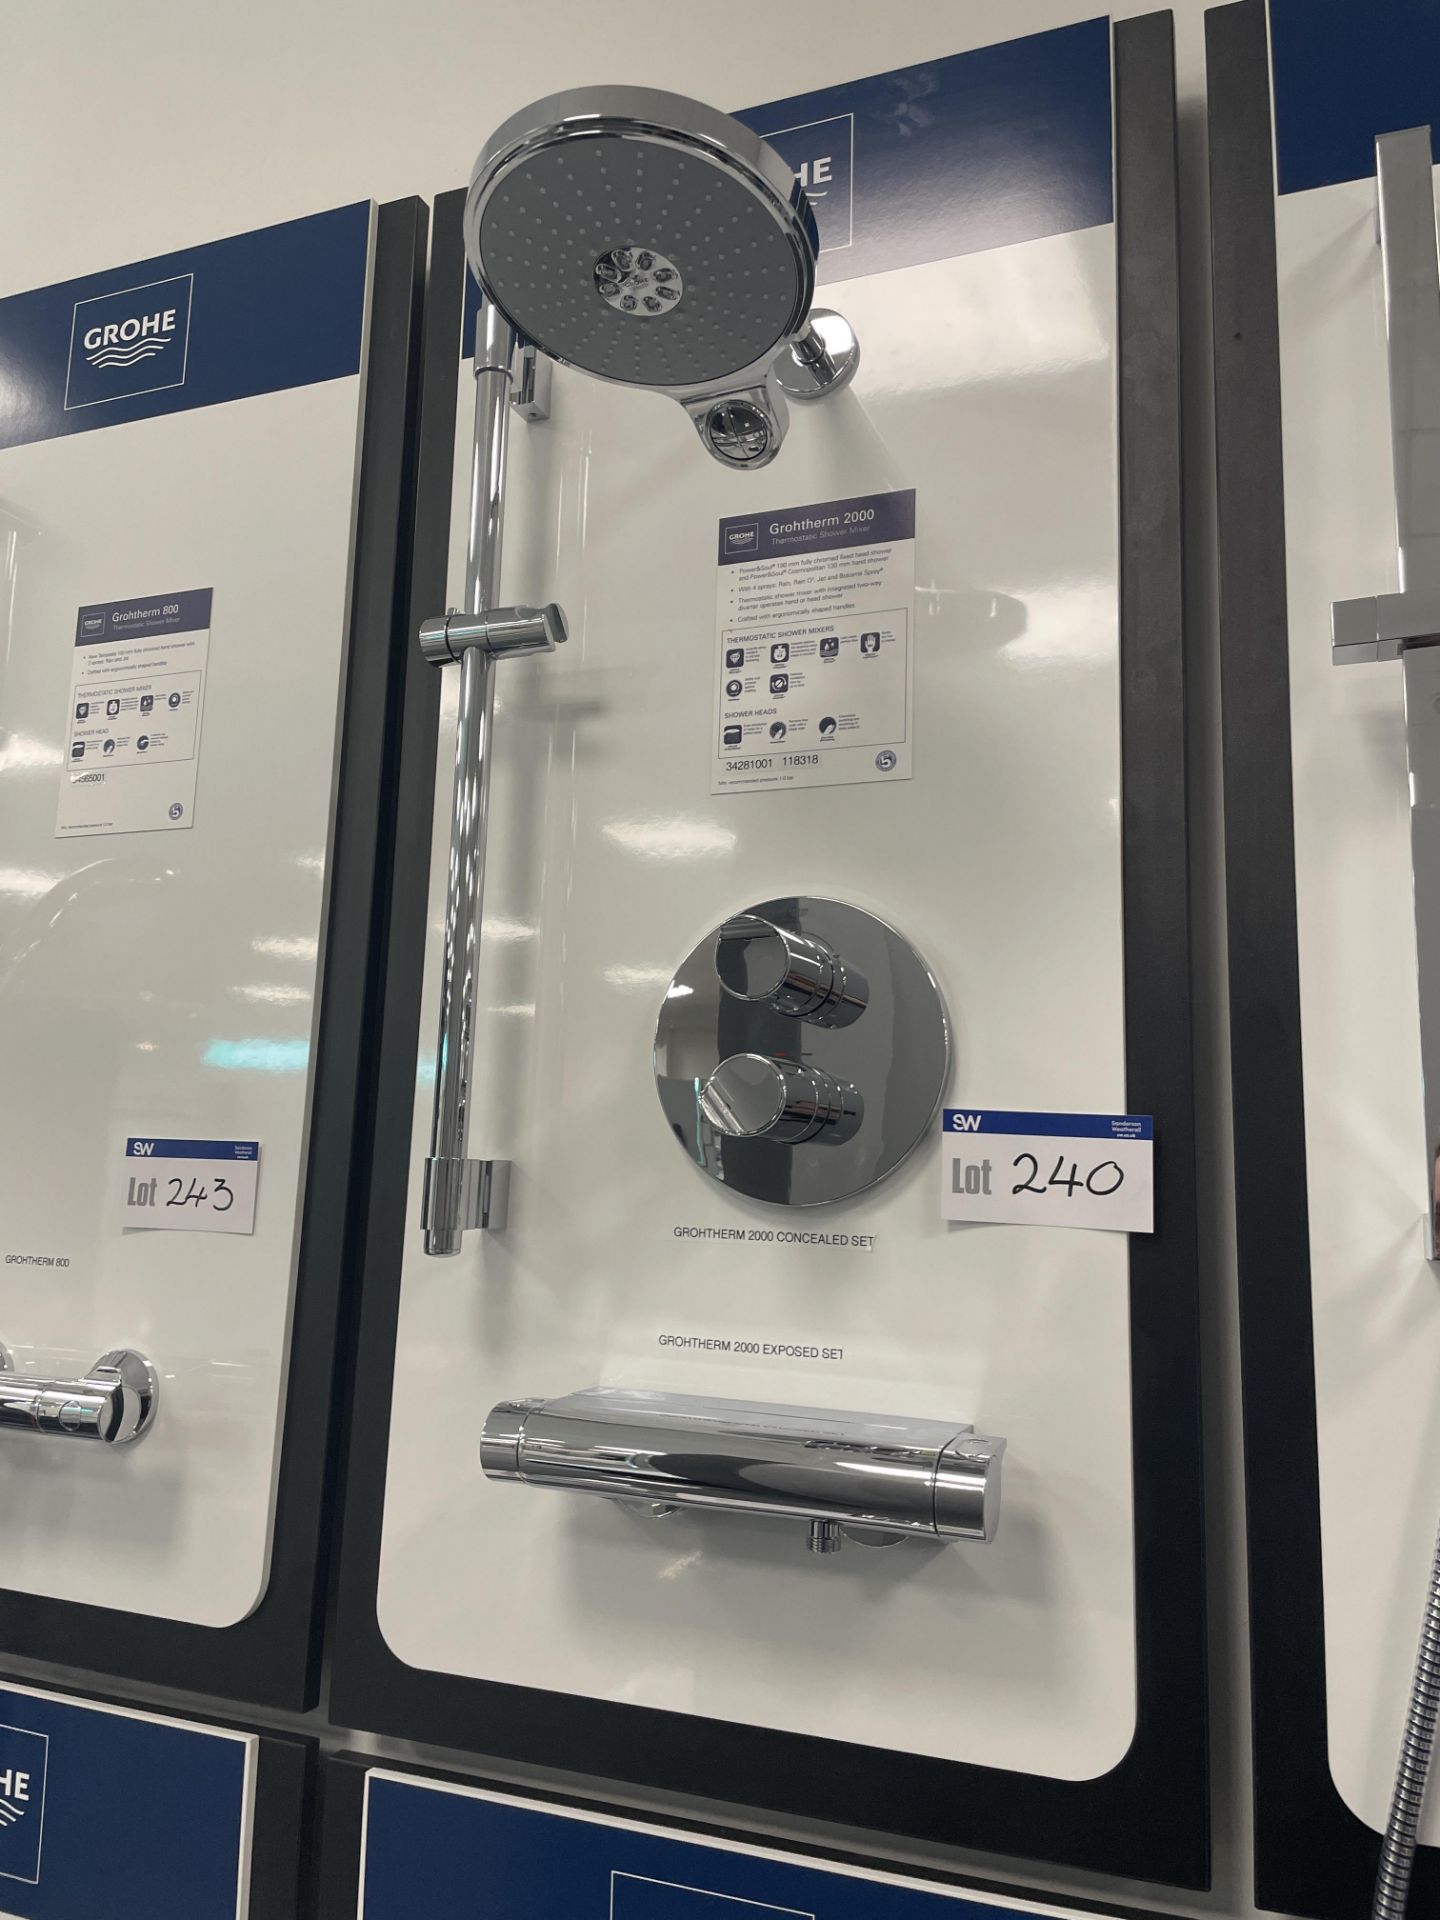 Grohe Grohtherm 2000 Thermostatic Shower System (understood to be a display unit and may not be